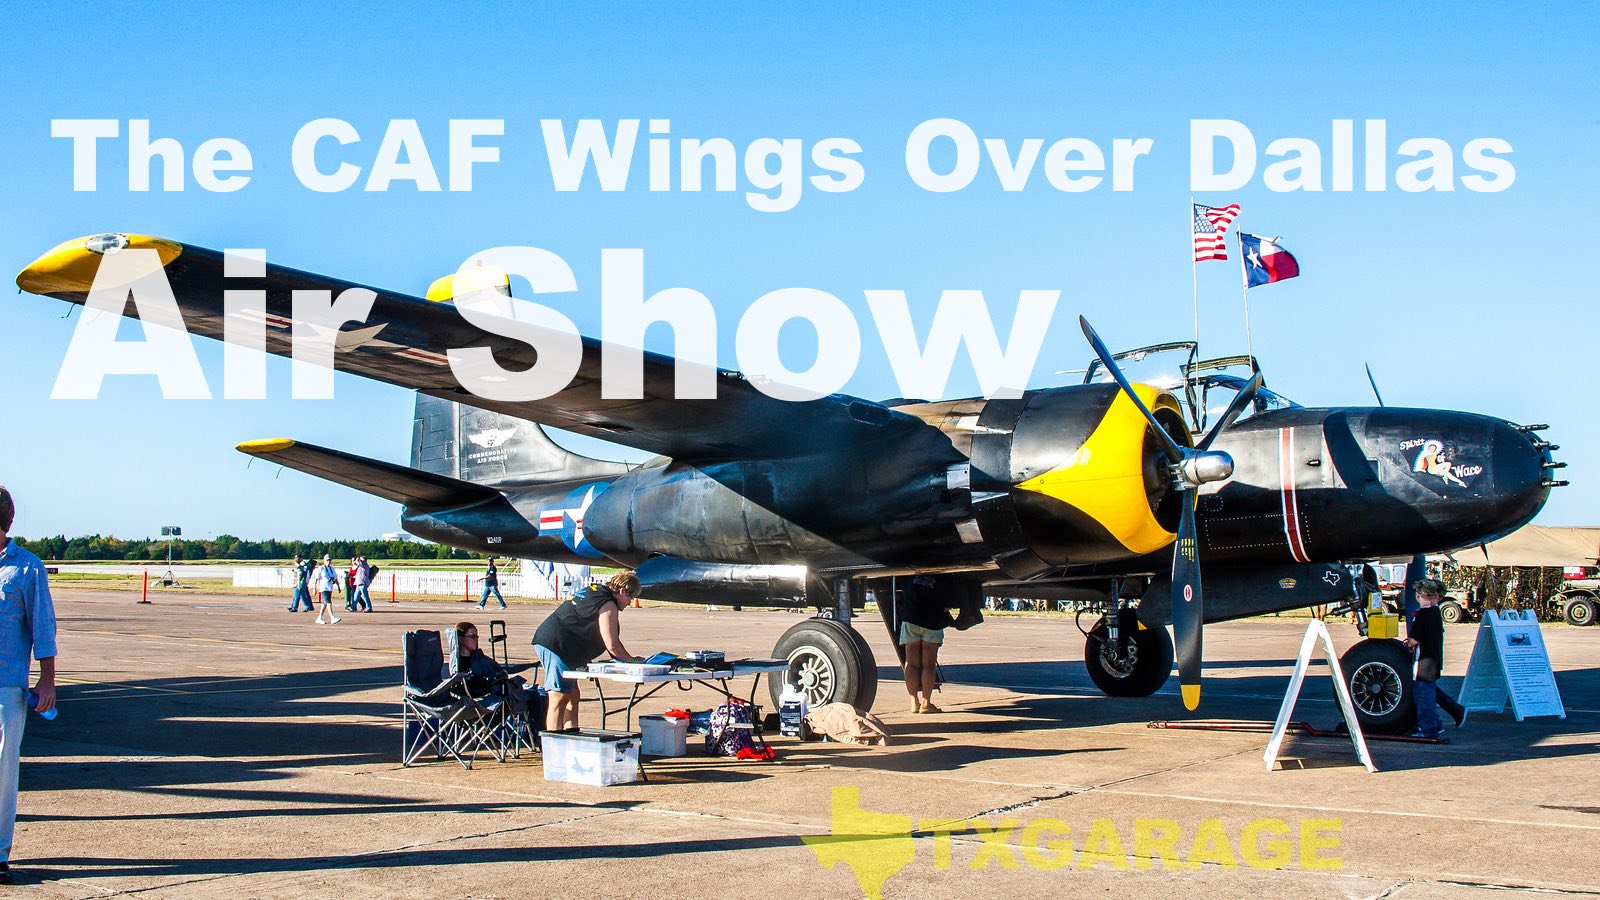 The CAF Wings Over Dallas Air Show